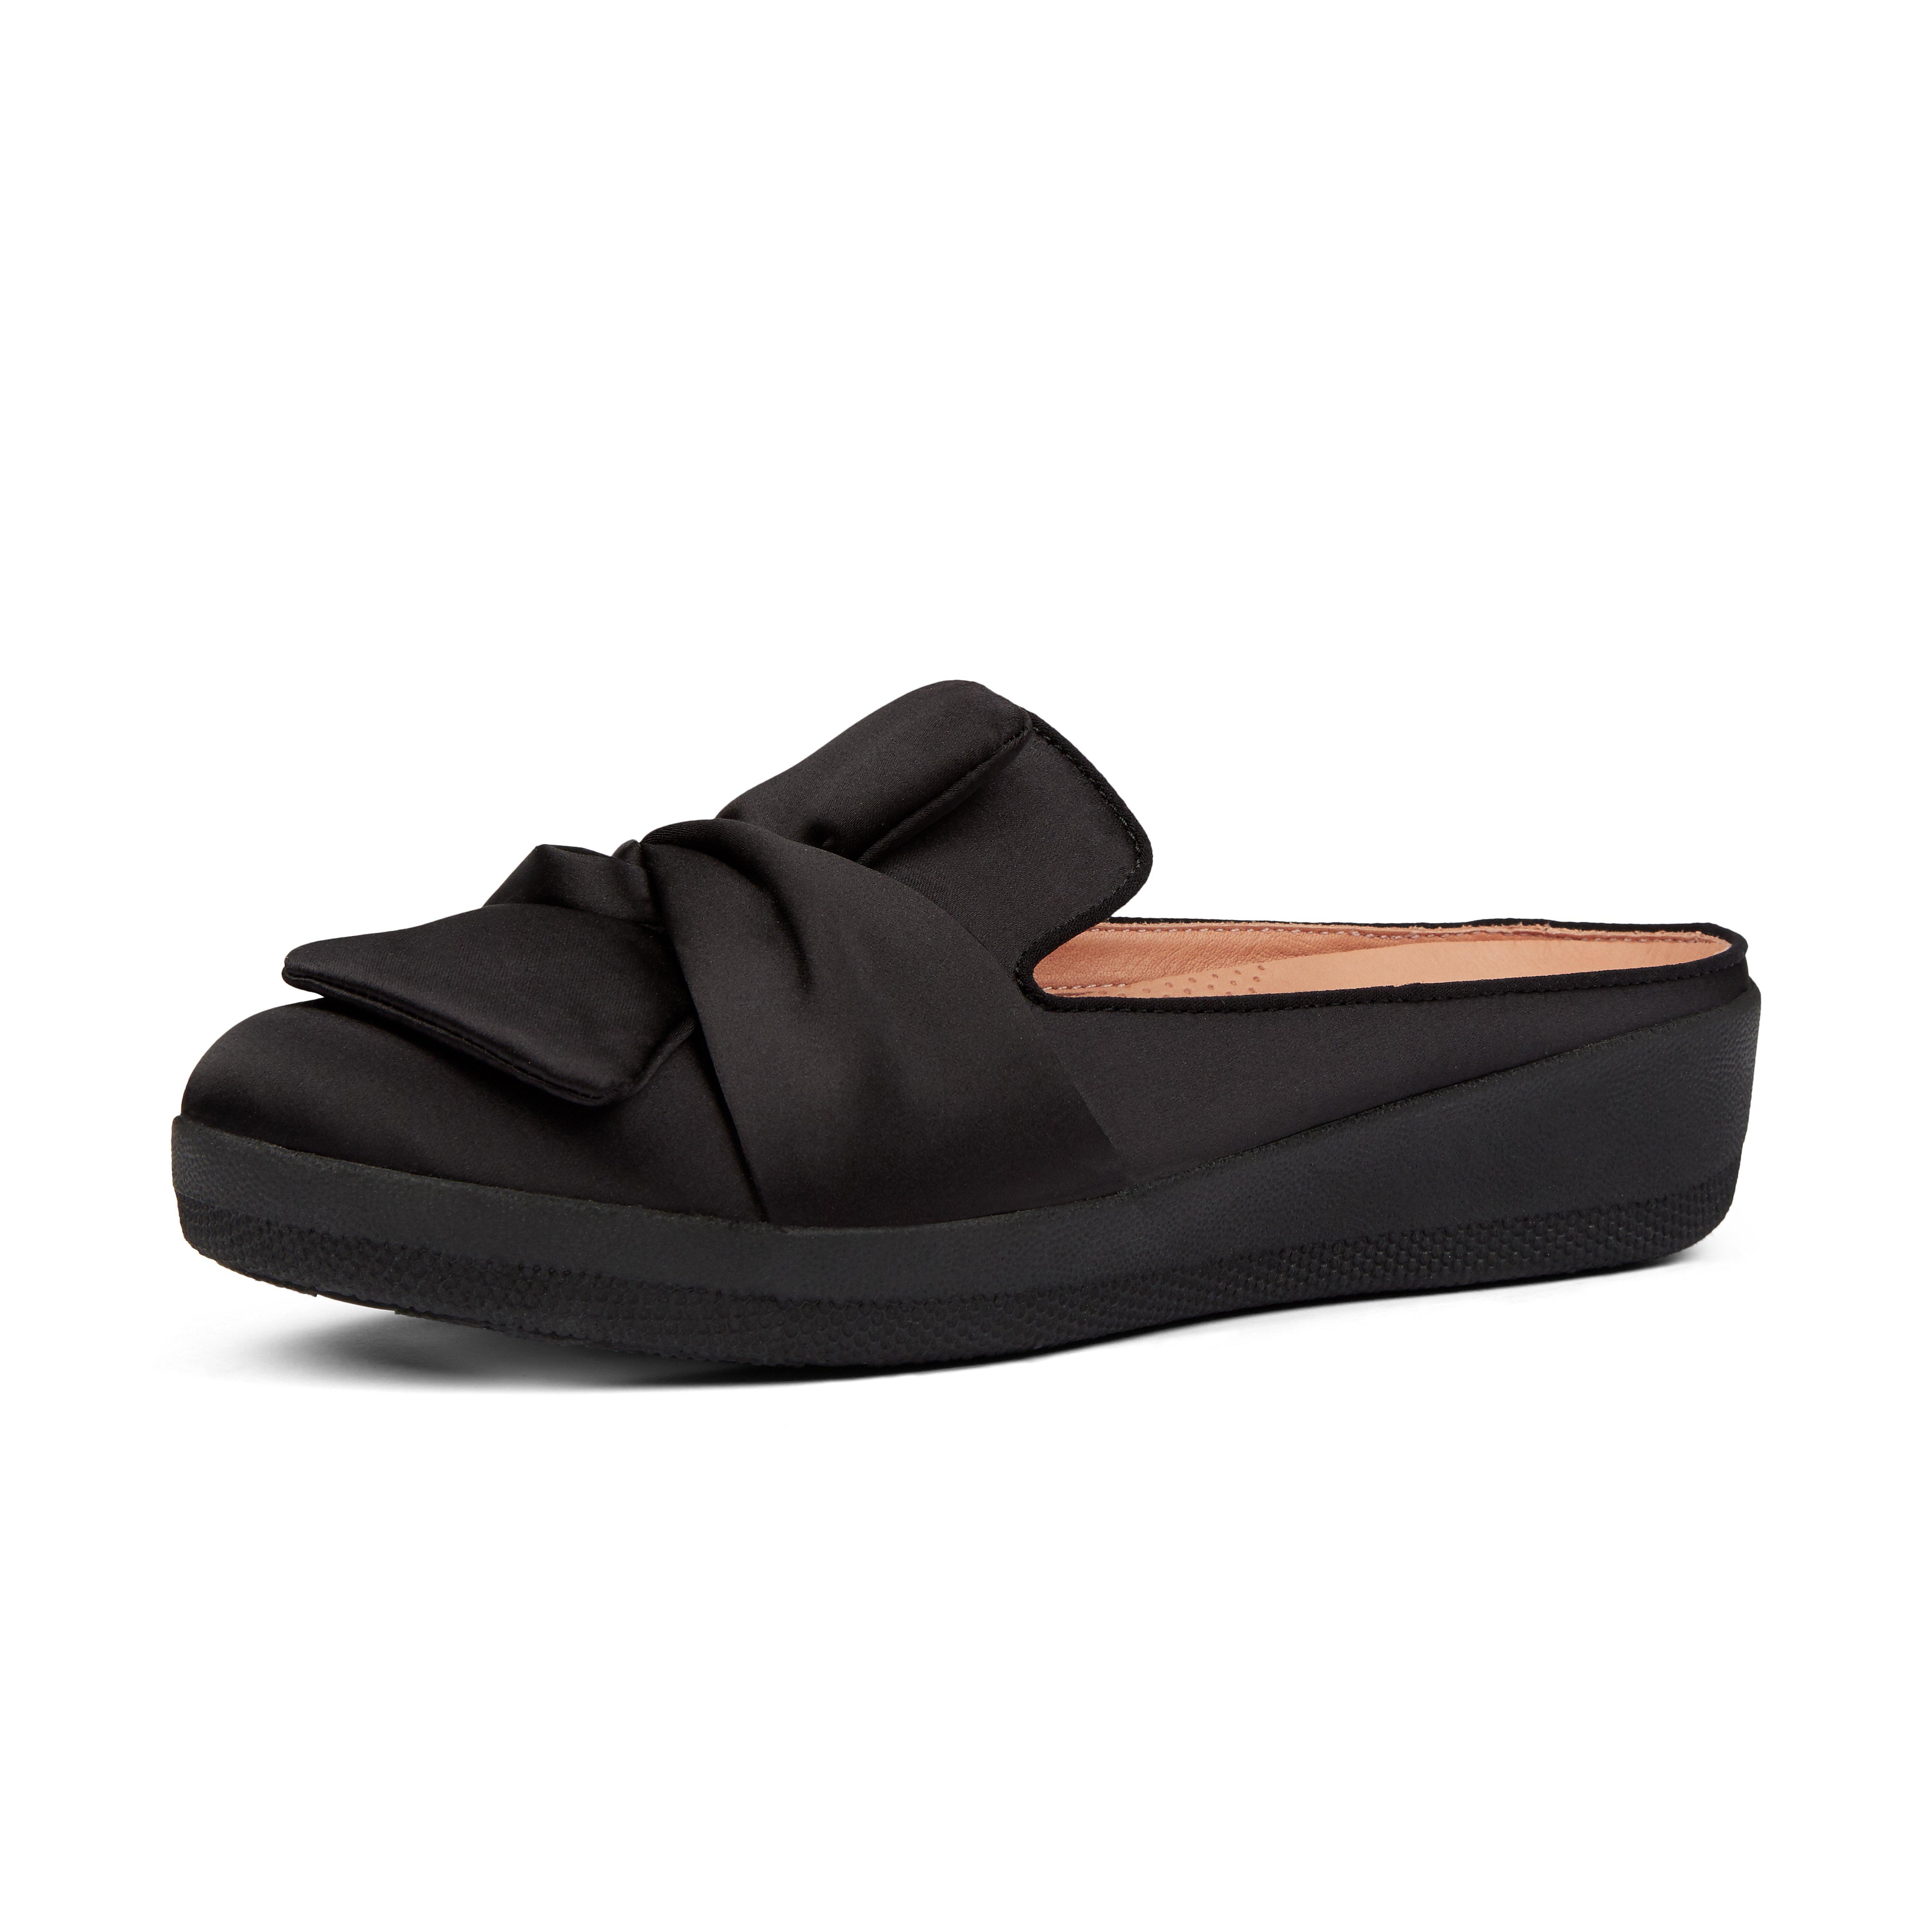 fitflop superskate knot mule